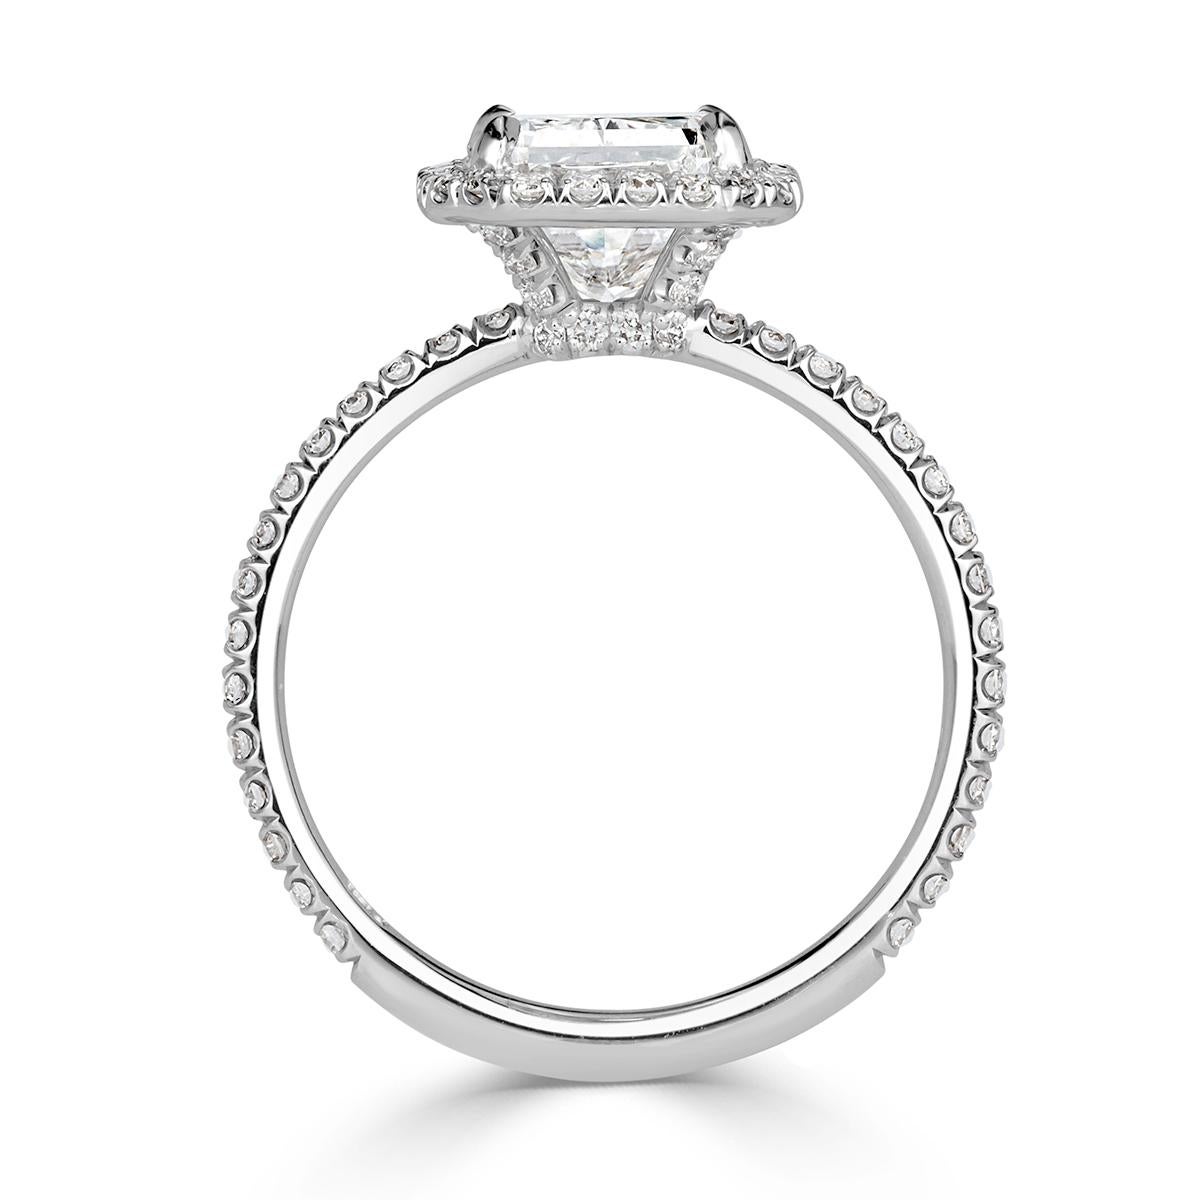  This absolutely gorgeous diamond engagement ring showcases a superb 3.01ct radiant cut center diamond, GIA certified at F-SI2. It is peerless white and perfectly eye-clean with phenomenal measurments of 10.03 x 6.98 mm which allows this beauty to